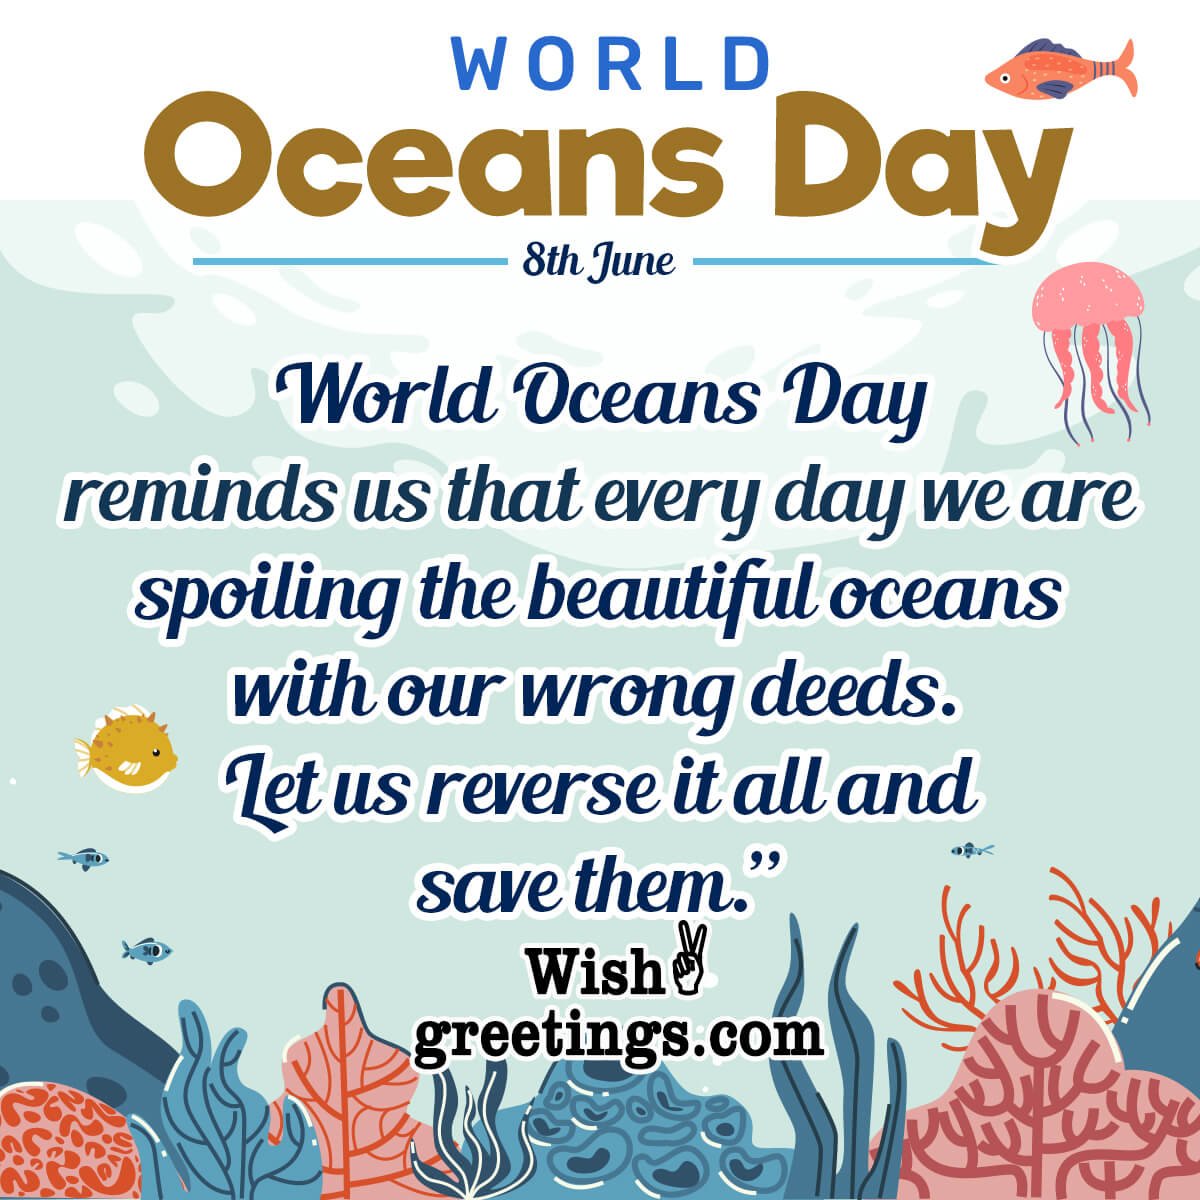 World Oceans Day Wishes, Messages, Quotes